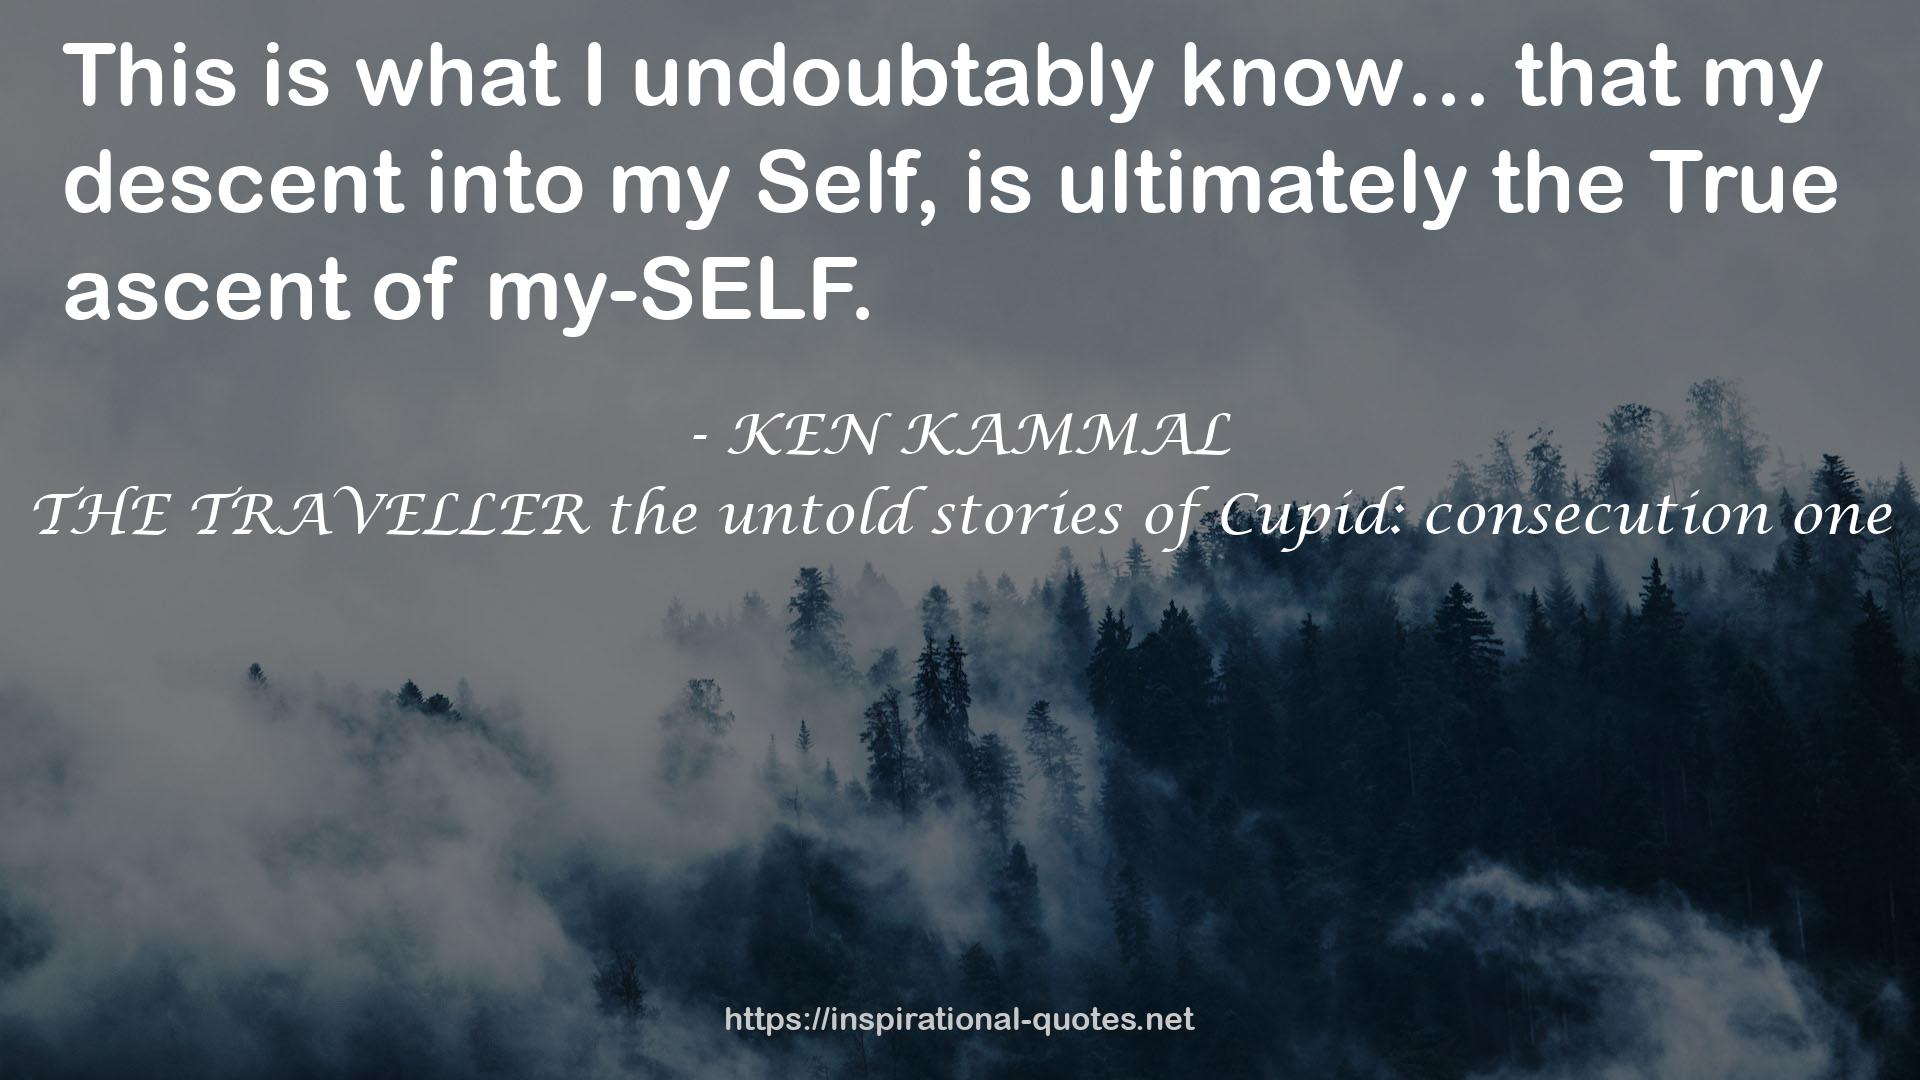 THE TRAVELLER the untold stories of Cupid: consecution one QUOTES